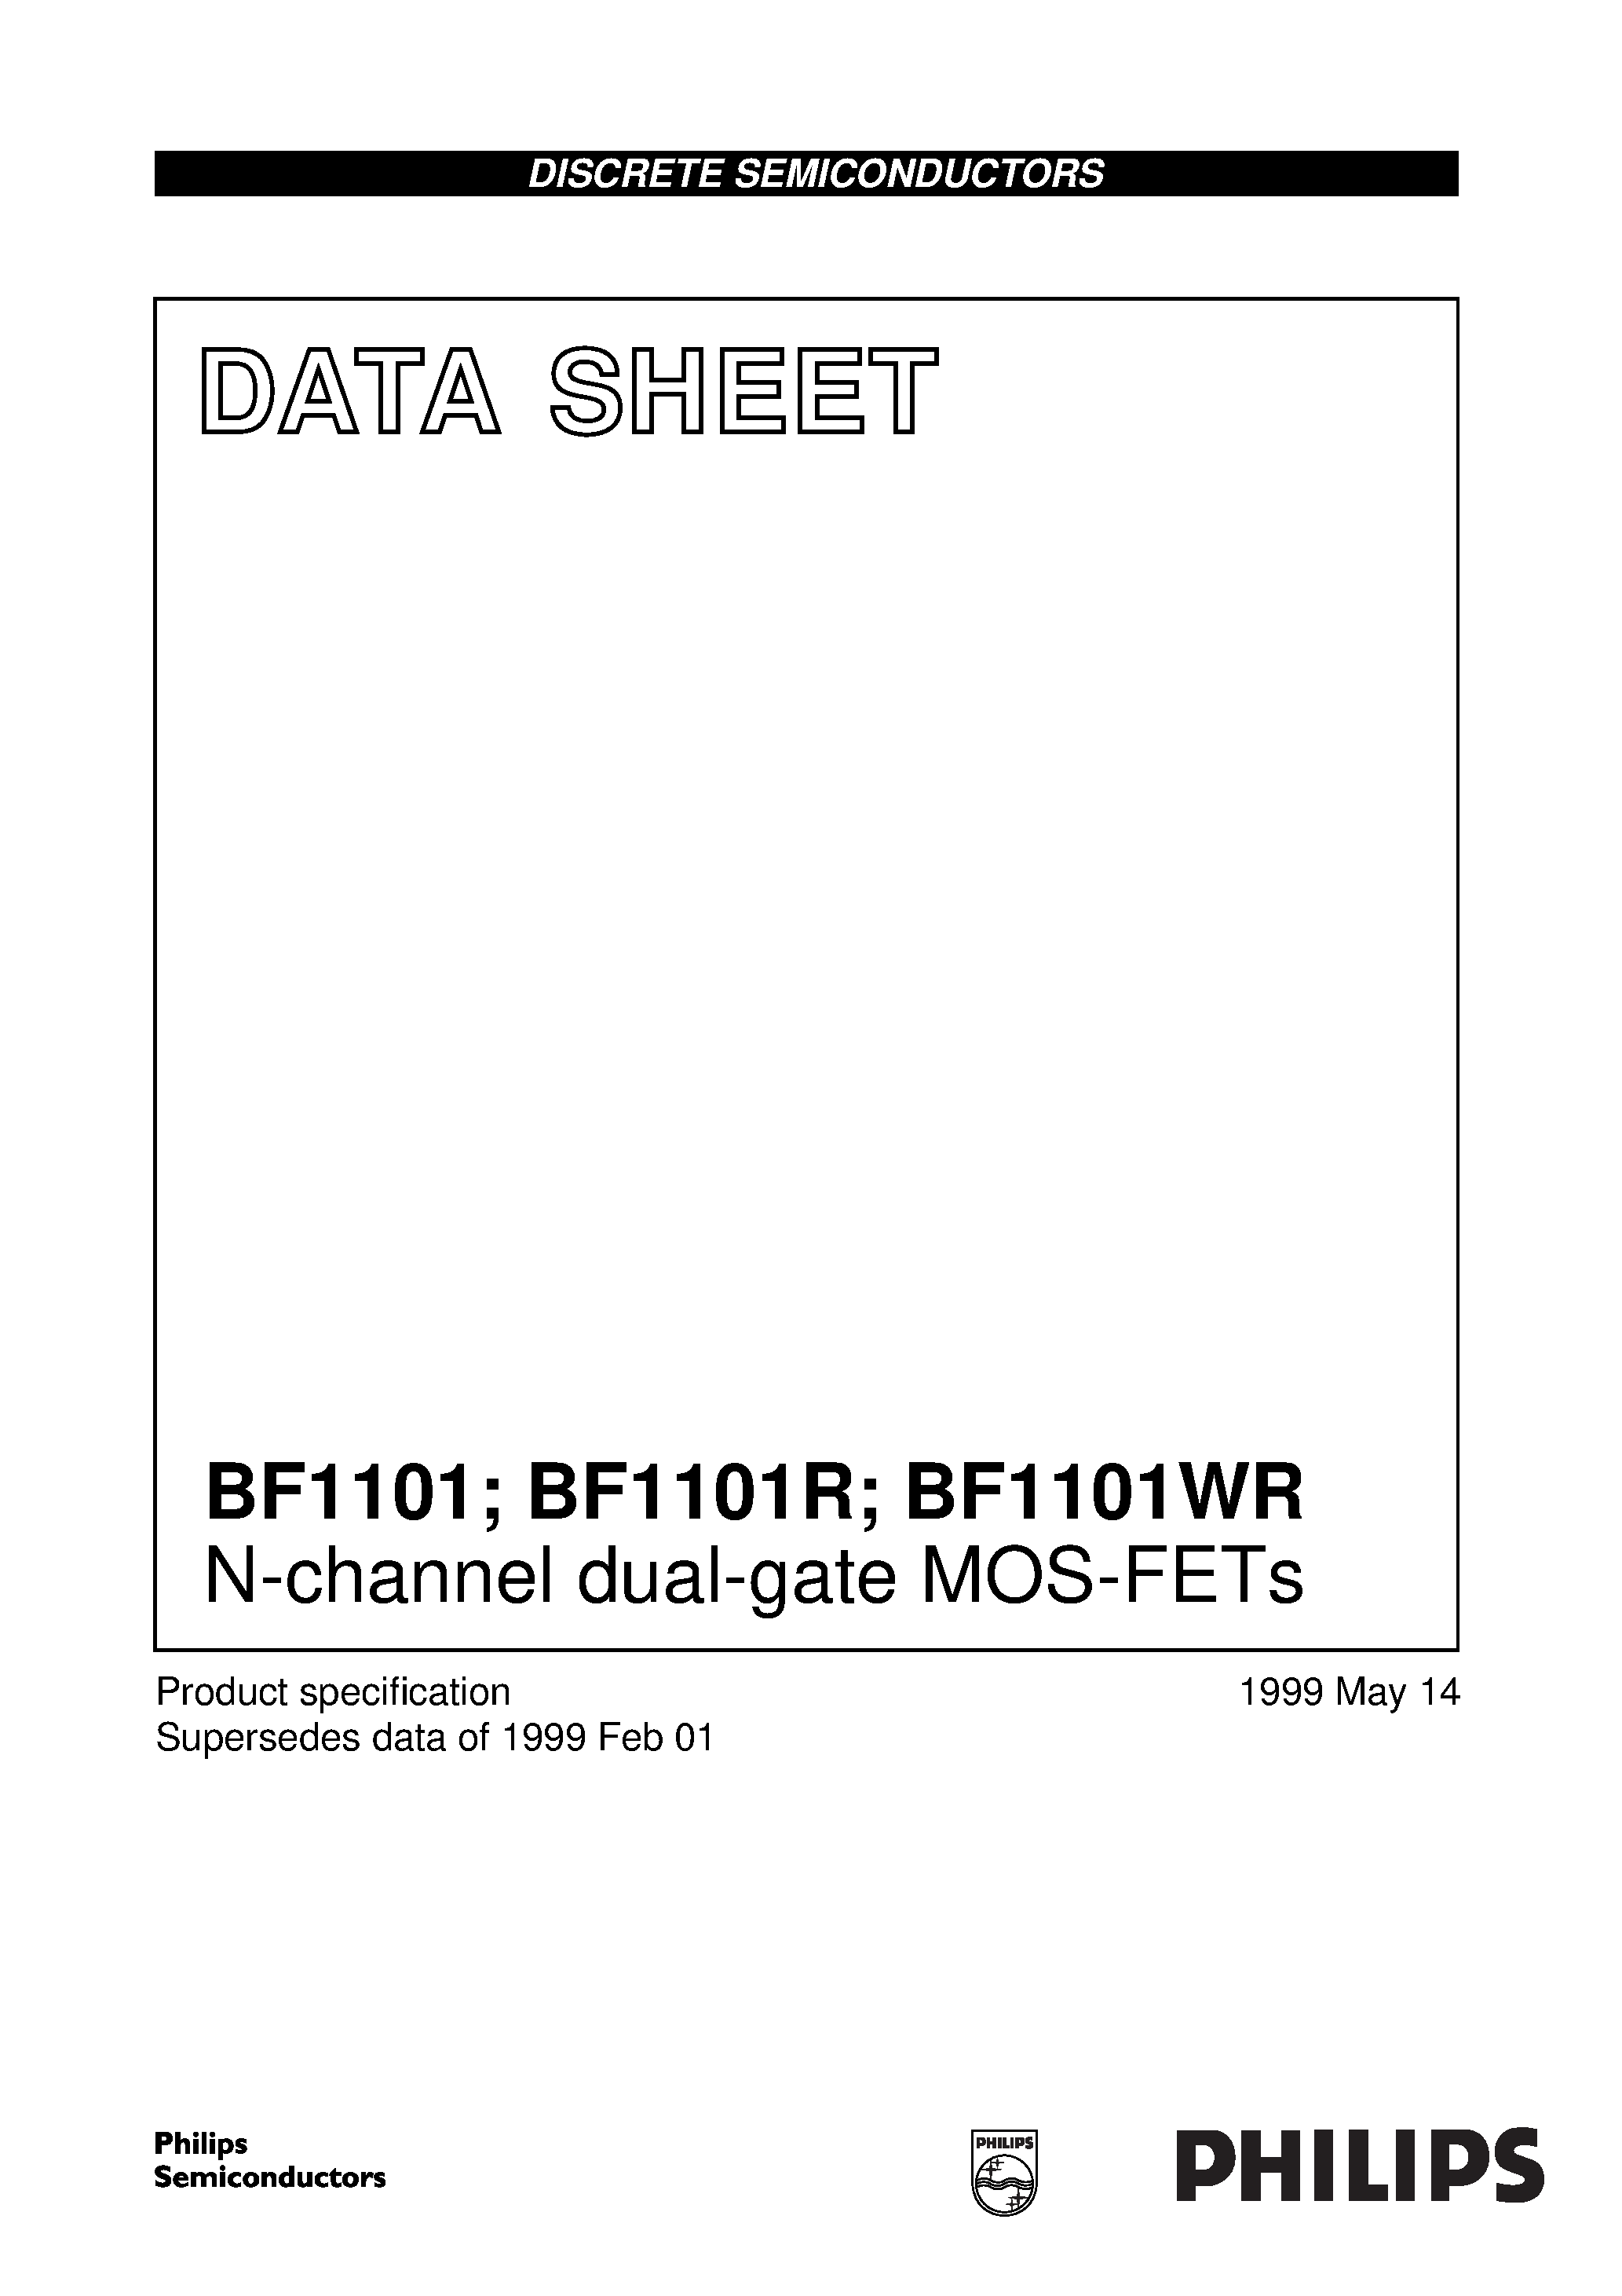 Datasheet BF1101R - N-channel dual-gate MOS-FETs page 1